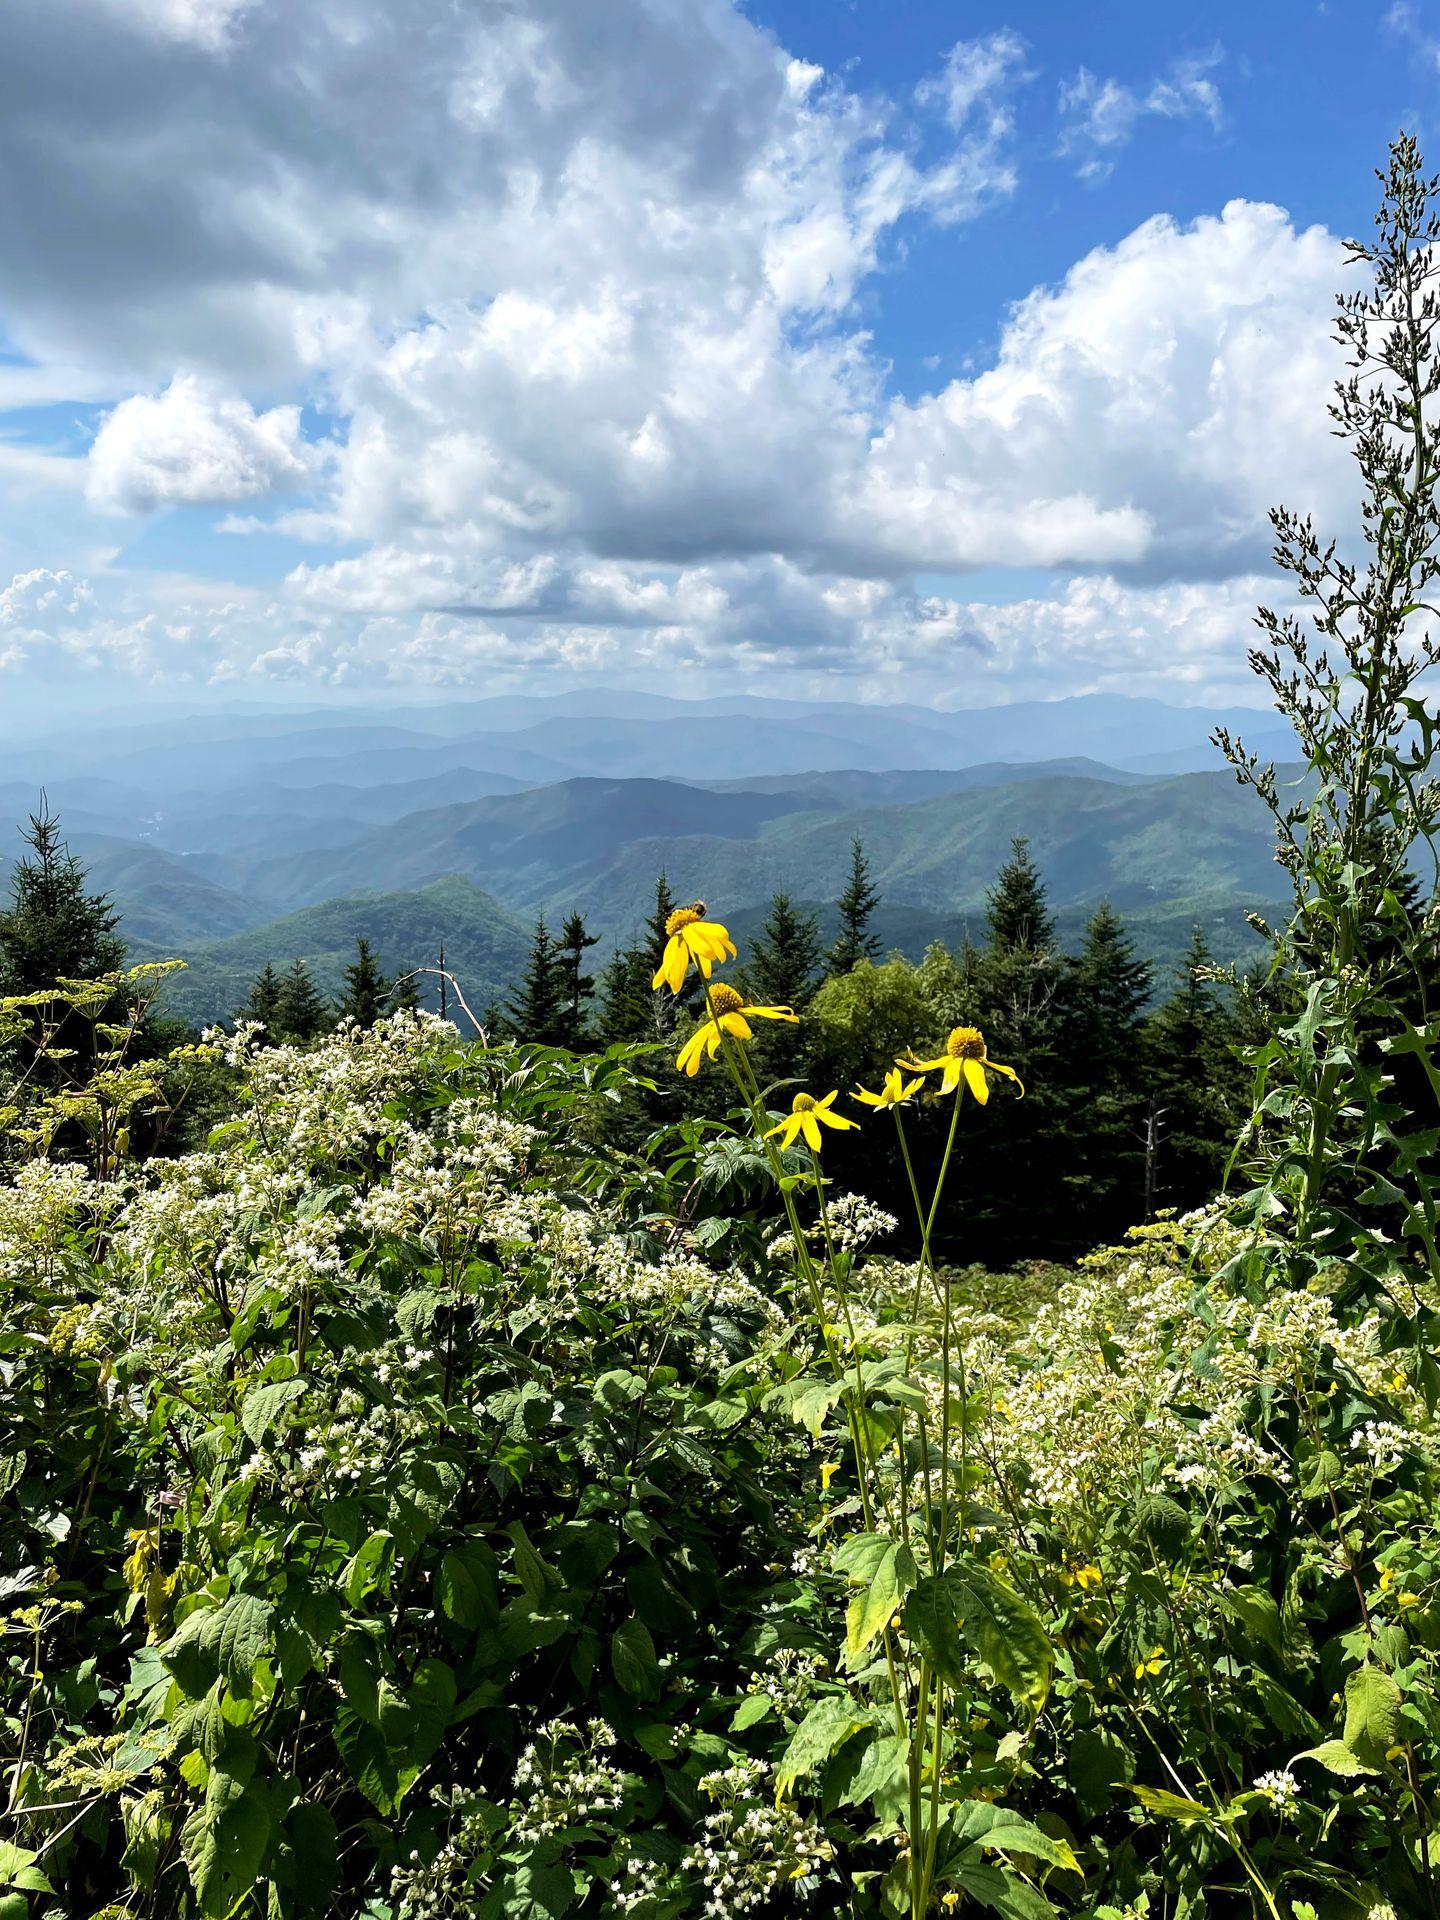 A view of the Blue Ridge Mountains with yellow flowers in the foreground.